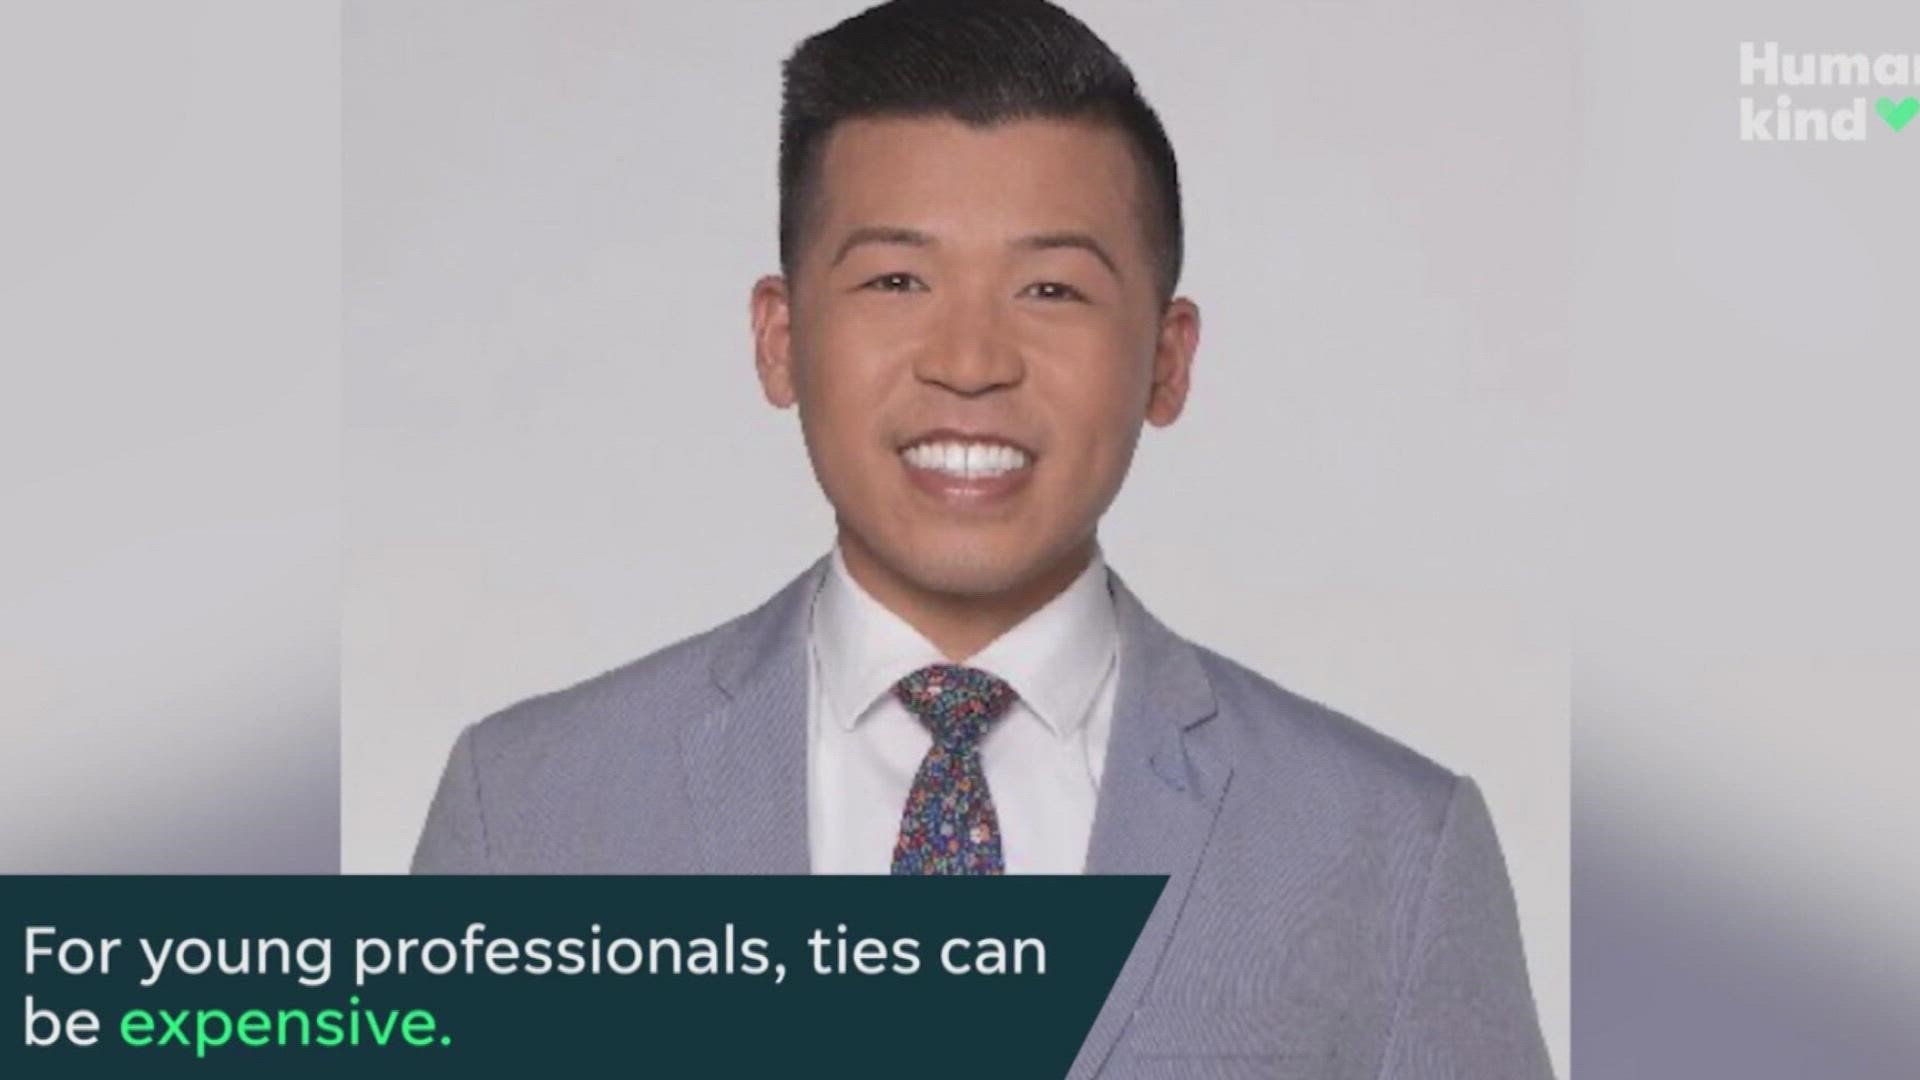 Pham wanted to donate his large collection of spare ties to young journalists. The anchor's donation has since gained national attention.